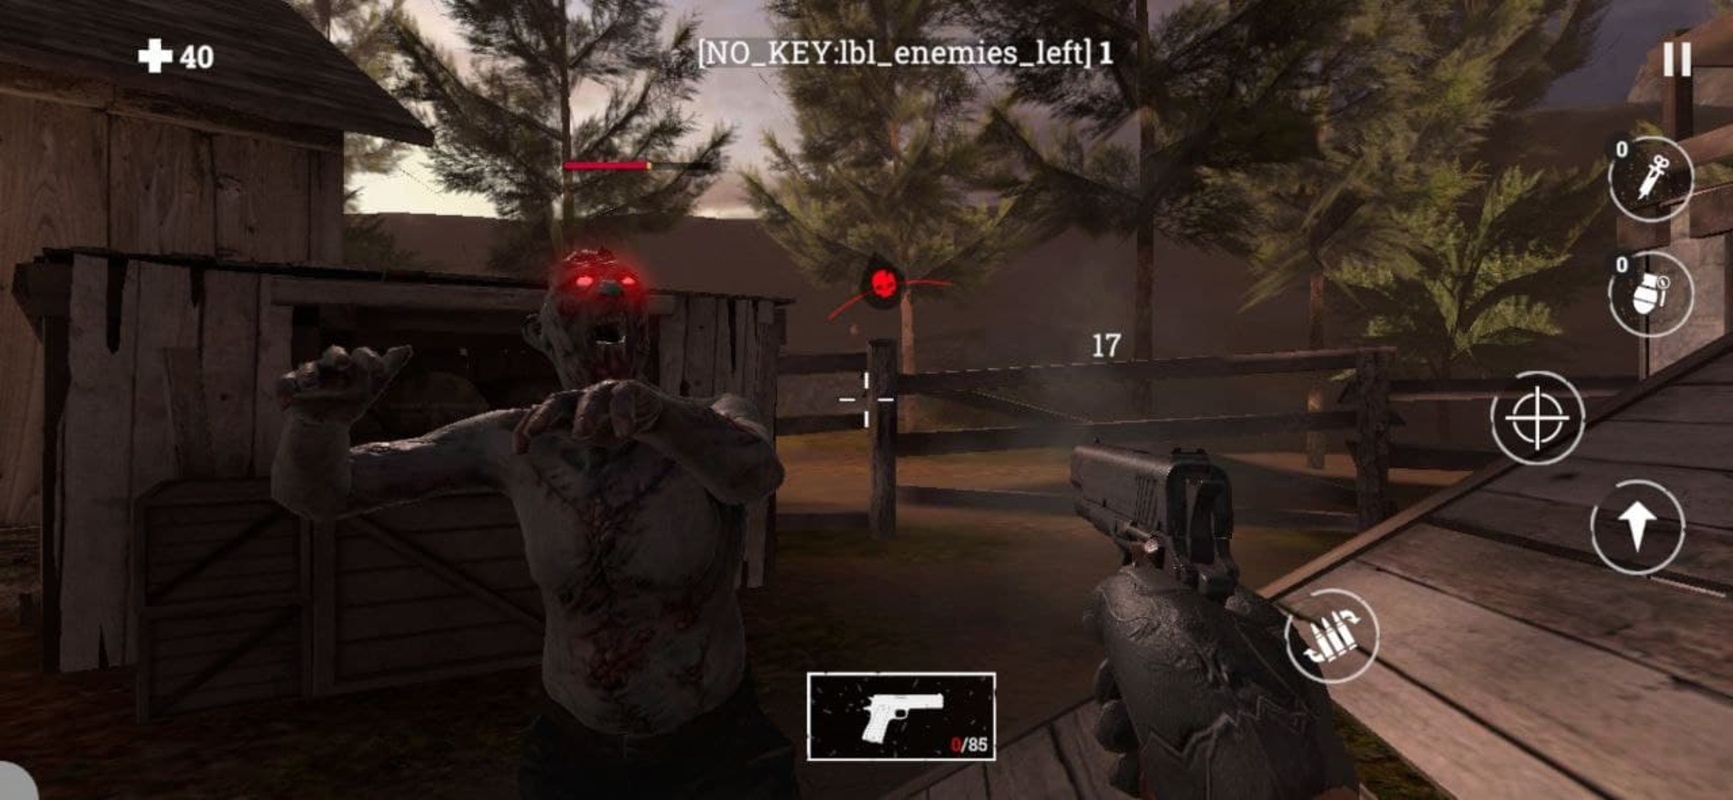 Crossfire: Survival Zombie Shooter 1.0.8 APK for Android Screenshot 7